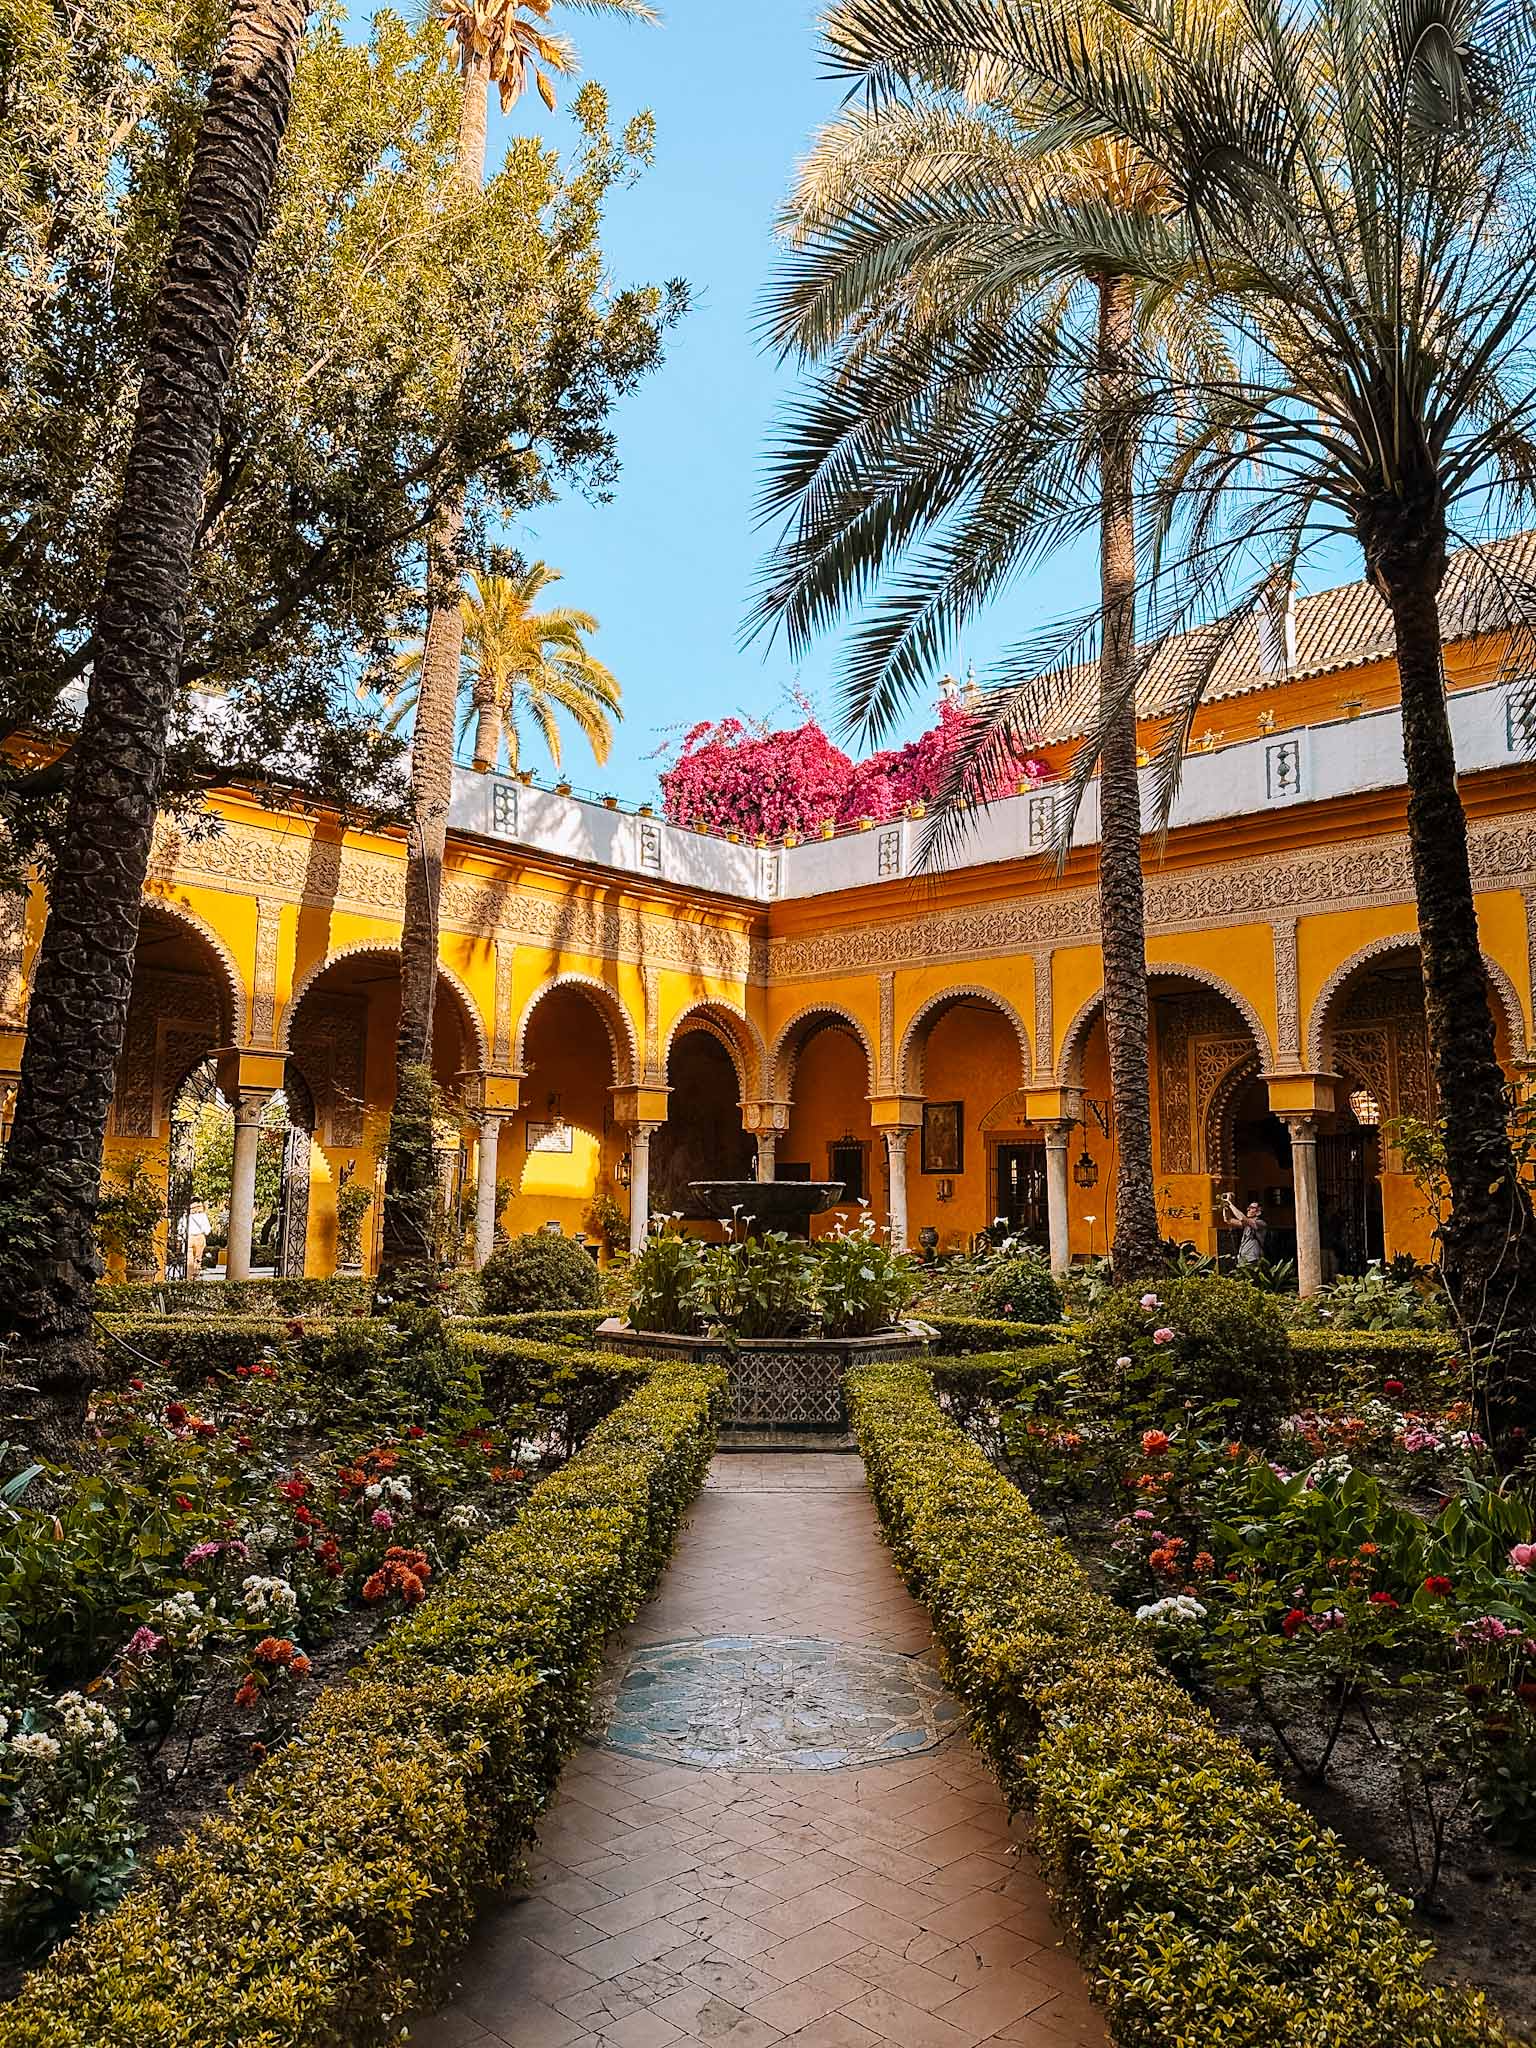 Best Instagram spots in the incredible city of Seville, Spain